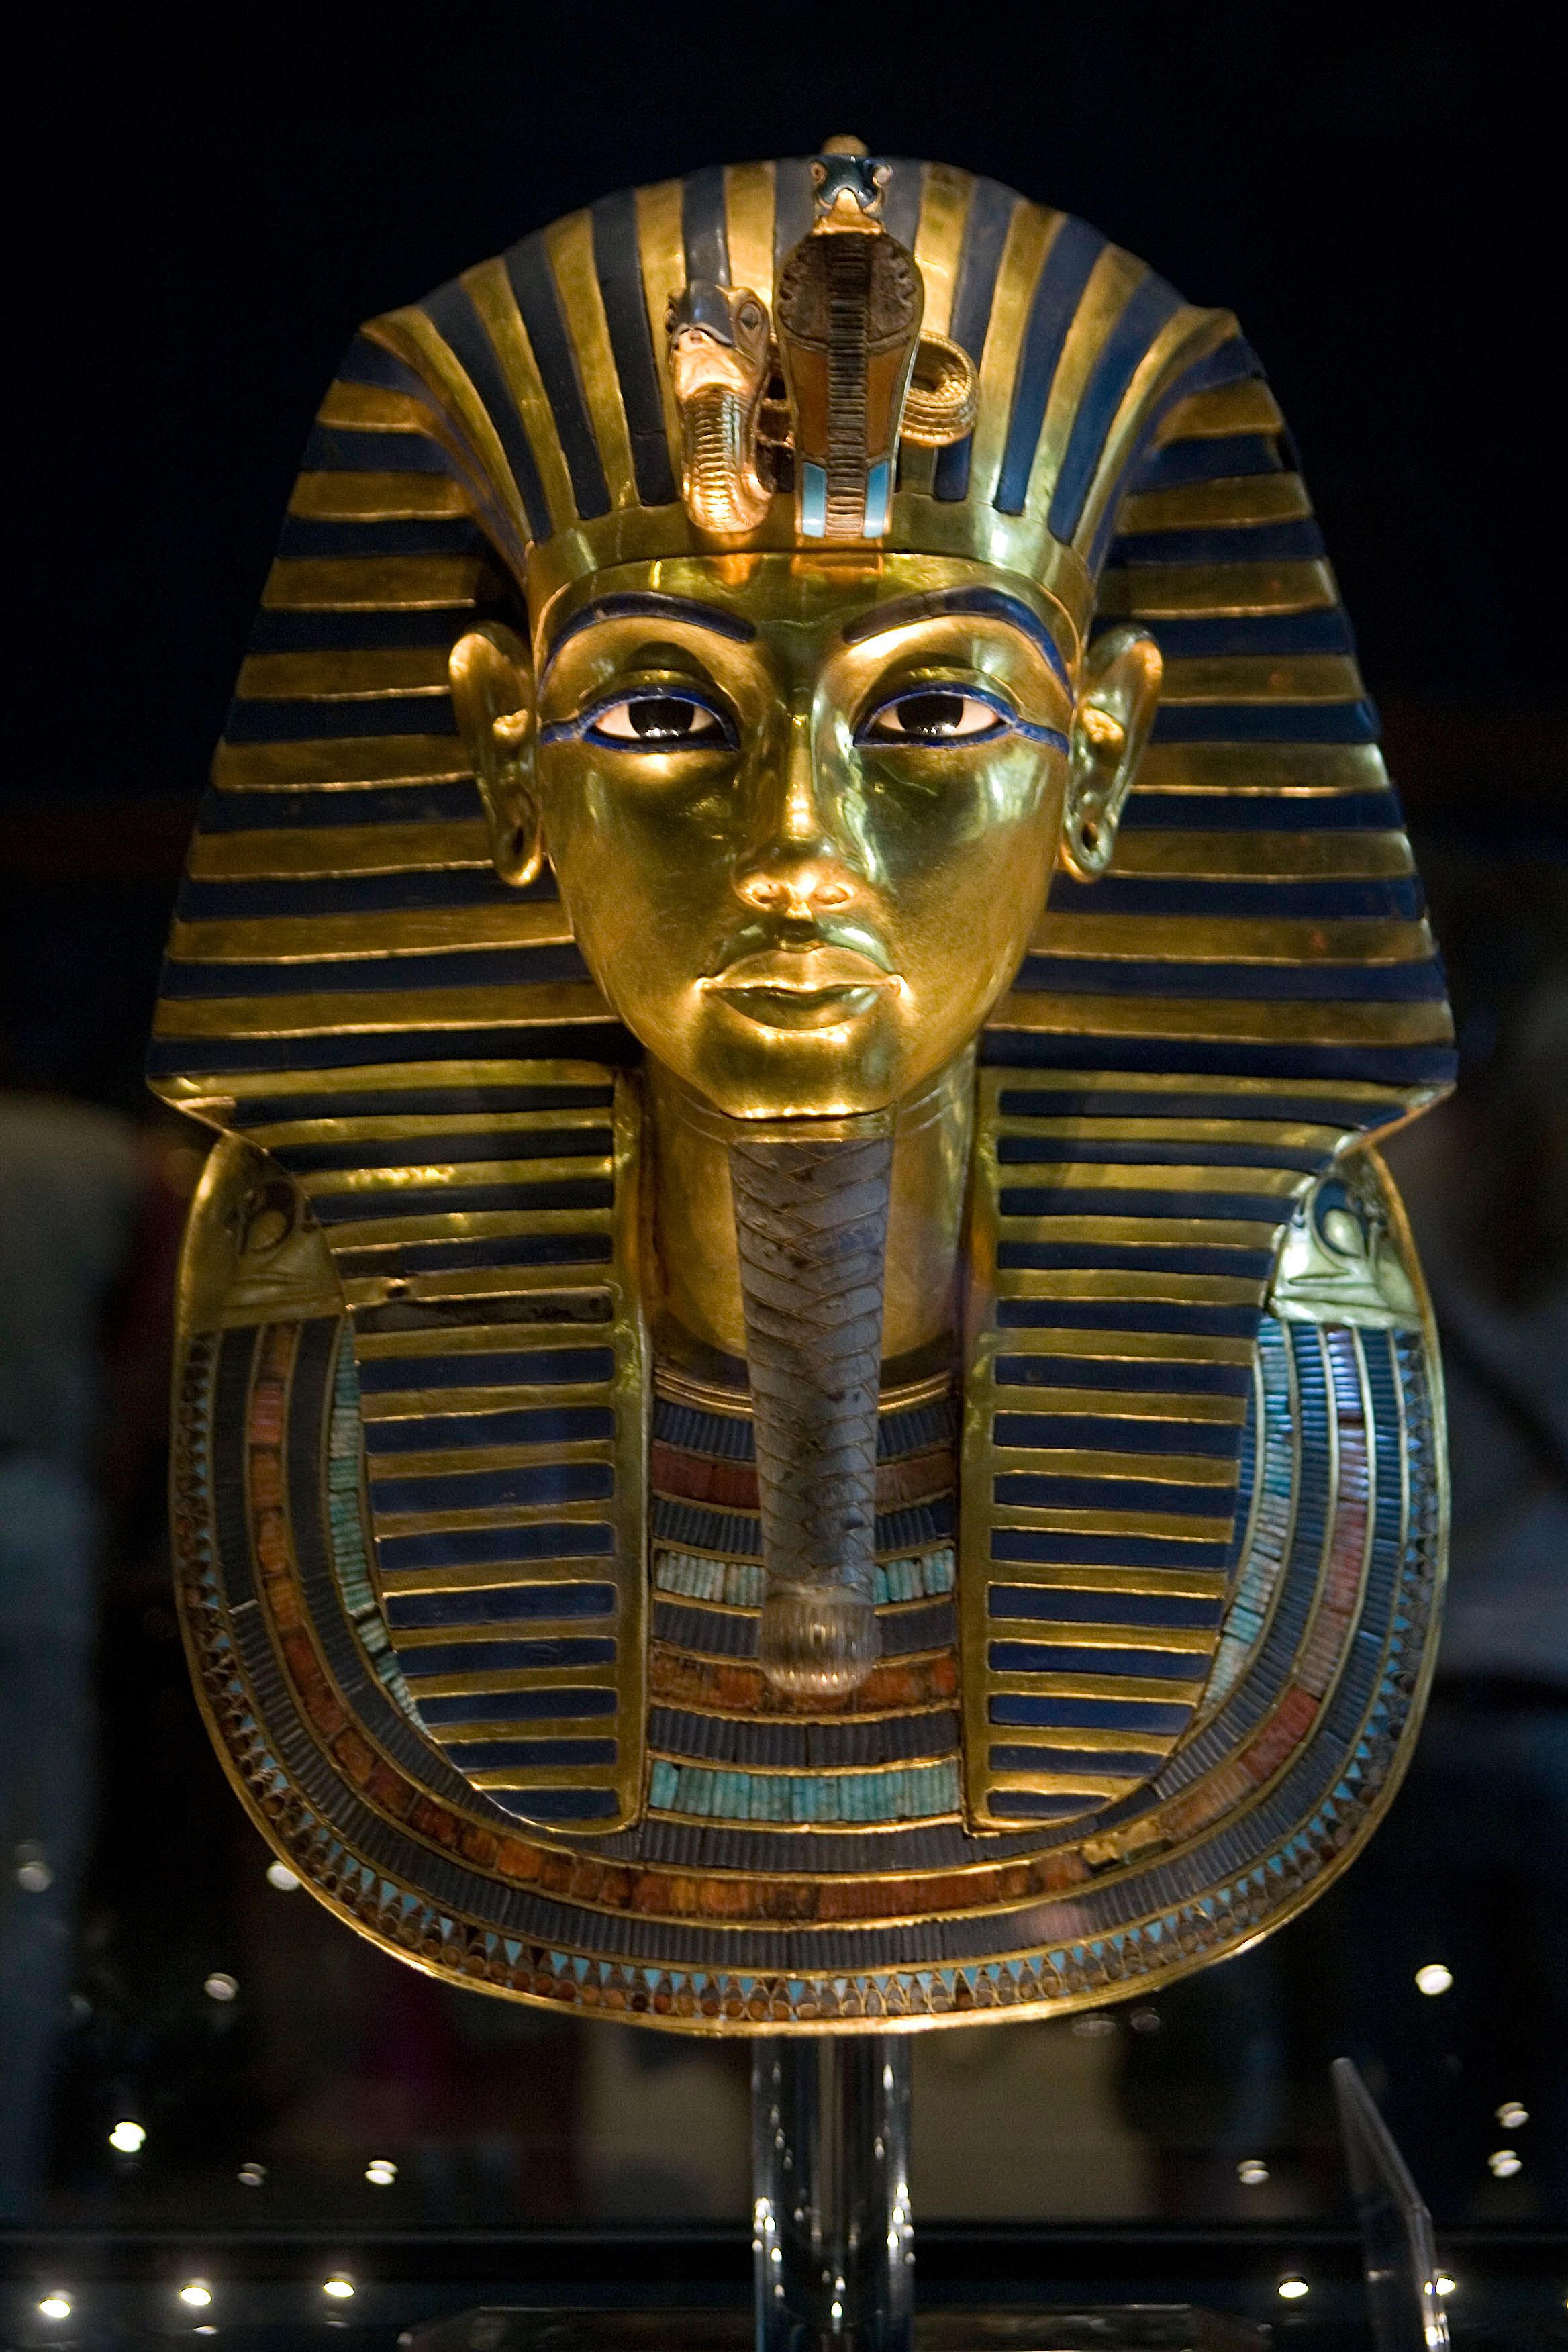 This file picture taken on October 20, 2009 shows a view of the gold burial mask of the ancient Egyptian Pharaoh Tutankhamun (reigned between 1342-1325 BC) on display at the Egyptian museum in Egypt´s capital Cairo. Ahead of the bicentenary of the deciphering of the Rosetta Stone -- which unlocked the key to reading ancient hieroglyphs -- and the 100th anniversary of Carter´s earth-shattering discovery, Egyptians are demanding that their contributions to the discoveries be recognised and artefacts abroad returned.